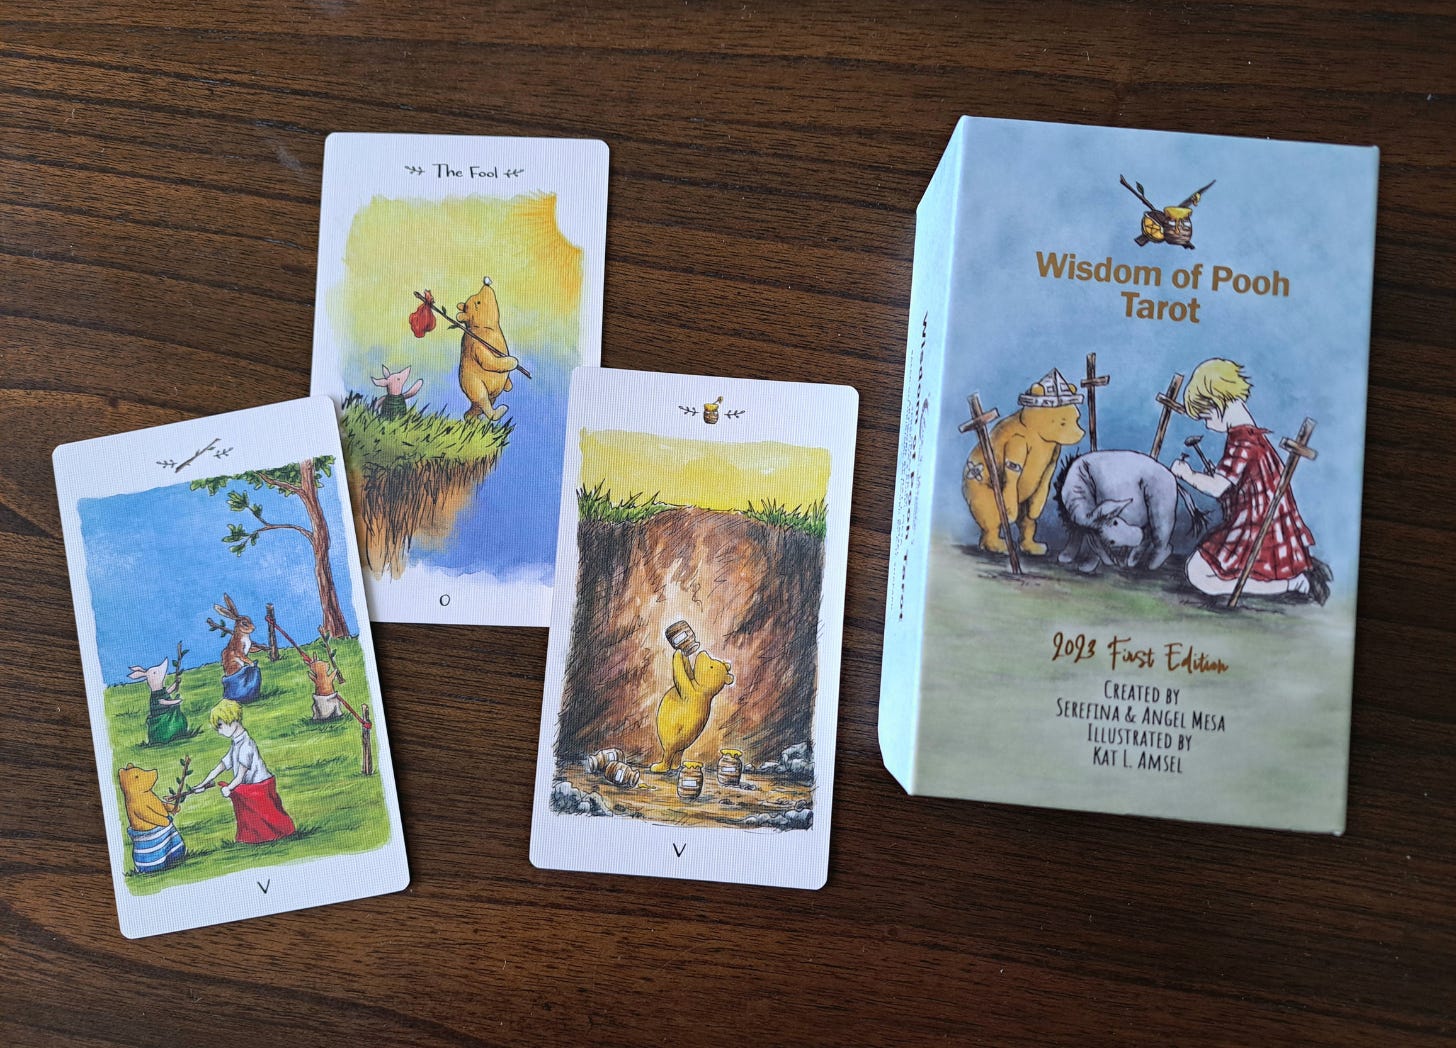 Image of Wisdom of Pooh Tarot deck with 3 cards